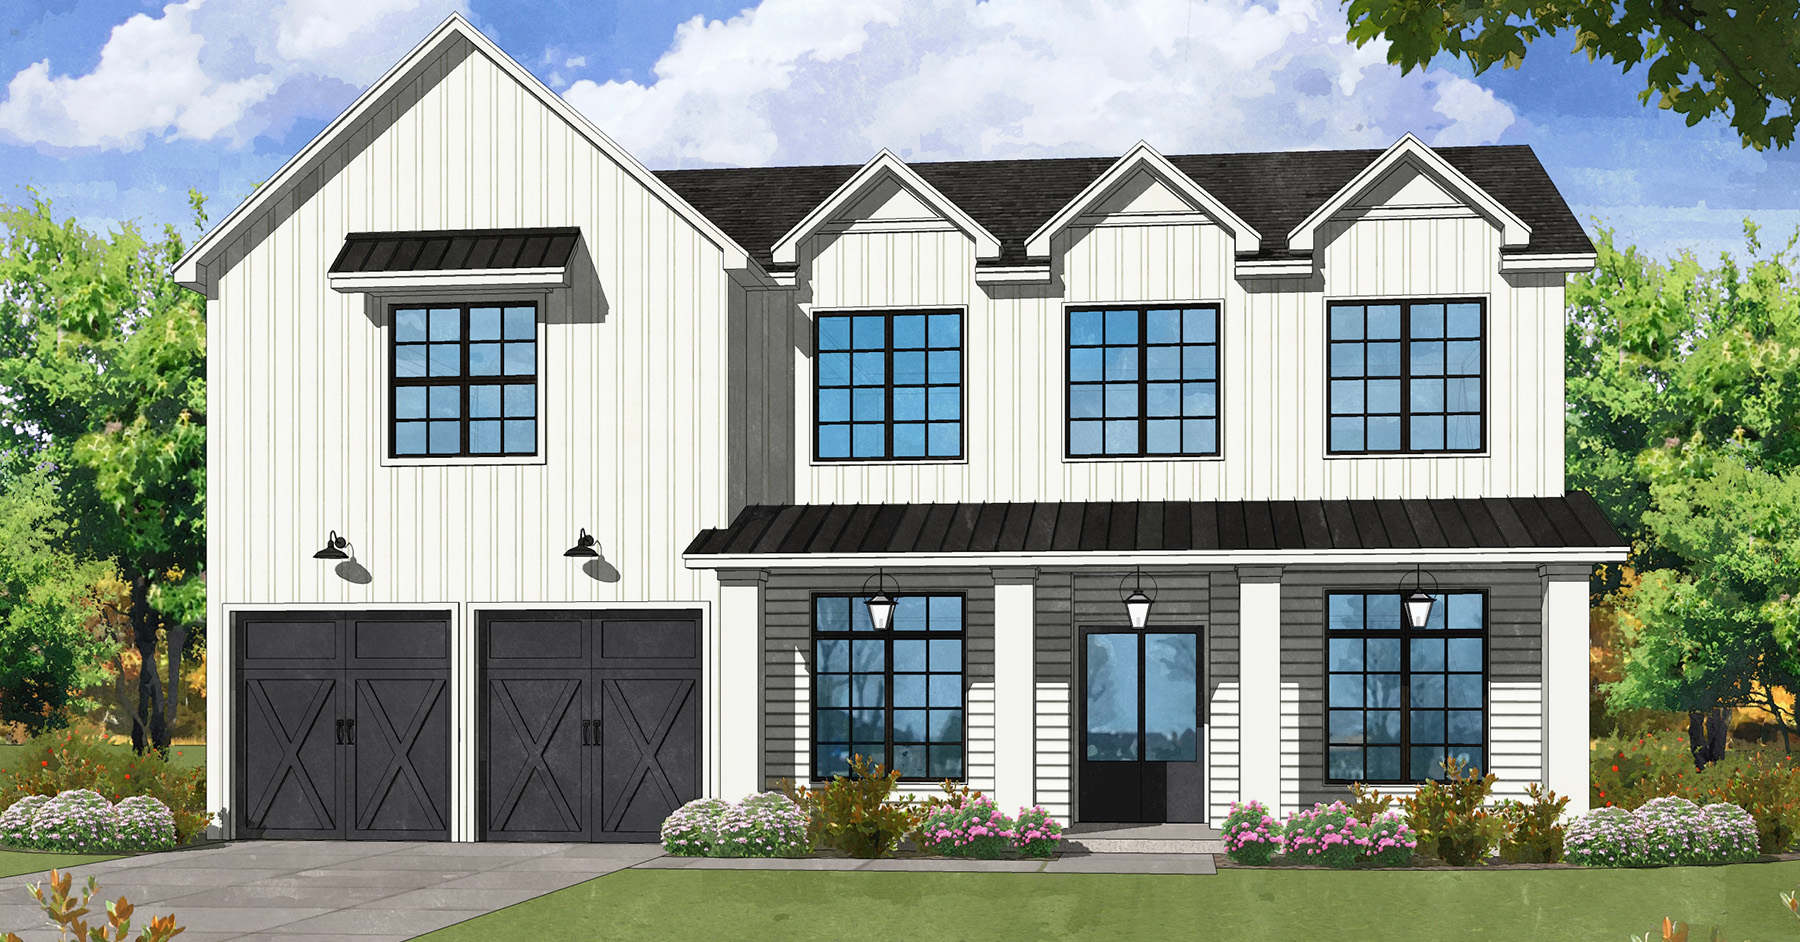 Westview Terrace <br/>
Modern Farmhouse Style, Completion Fall 2019 <br/>
6522 Schiller, Houston, TX 77055